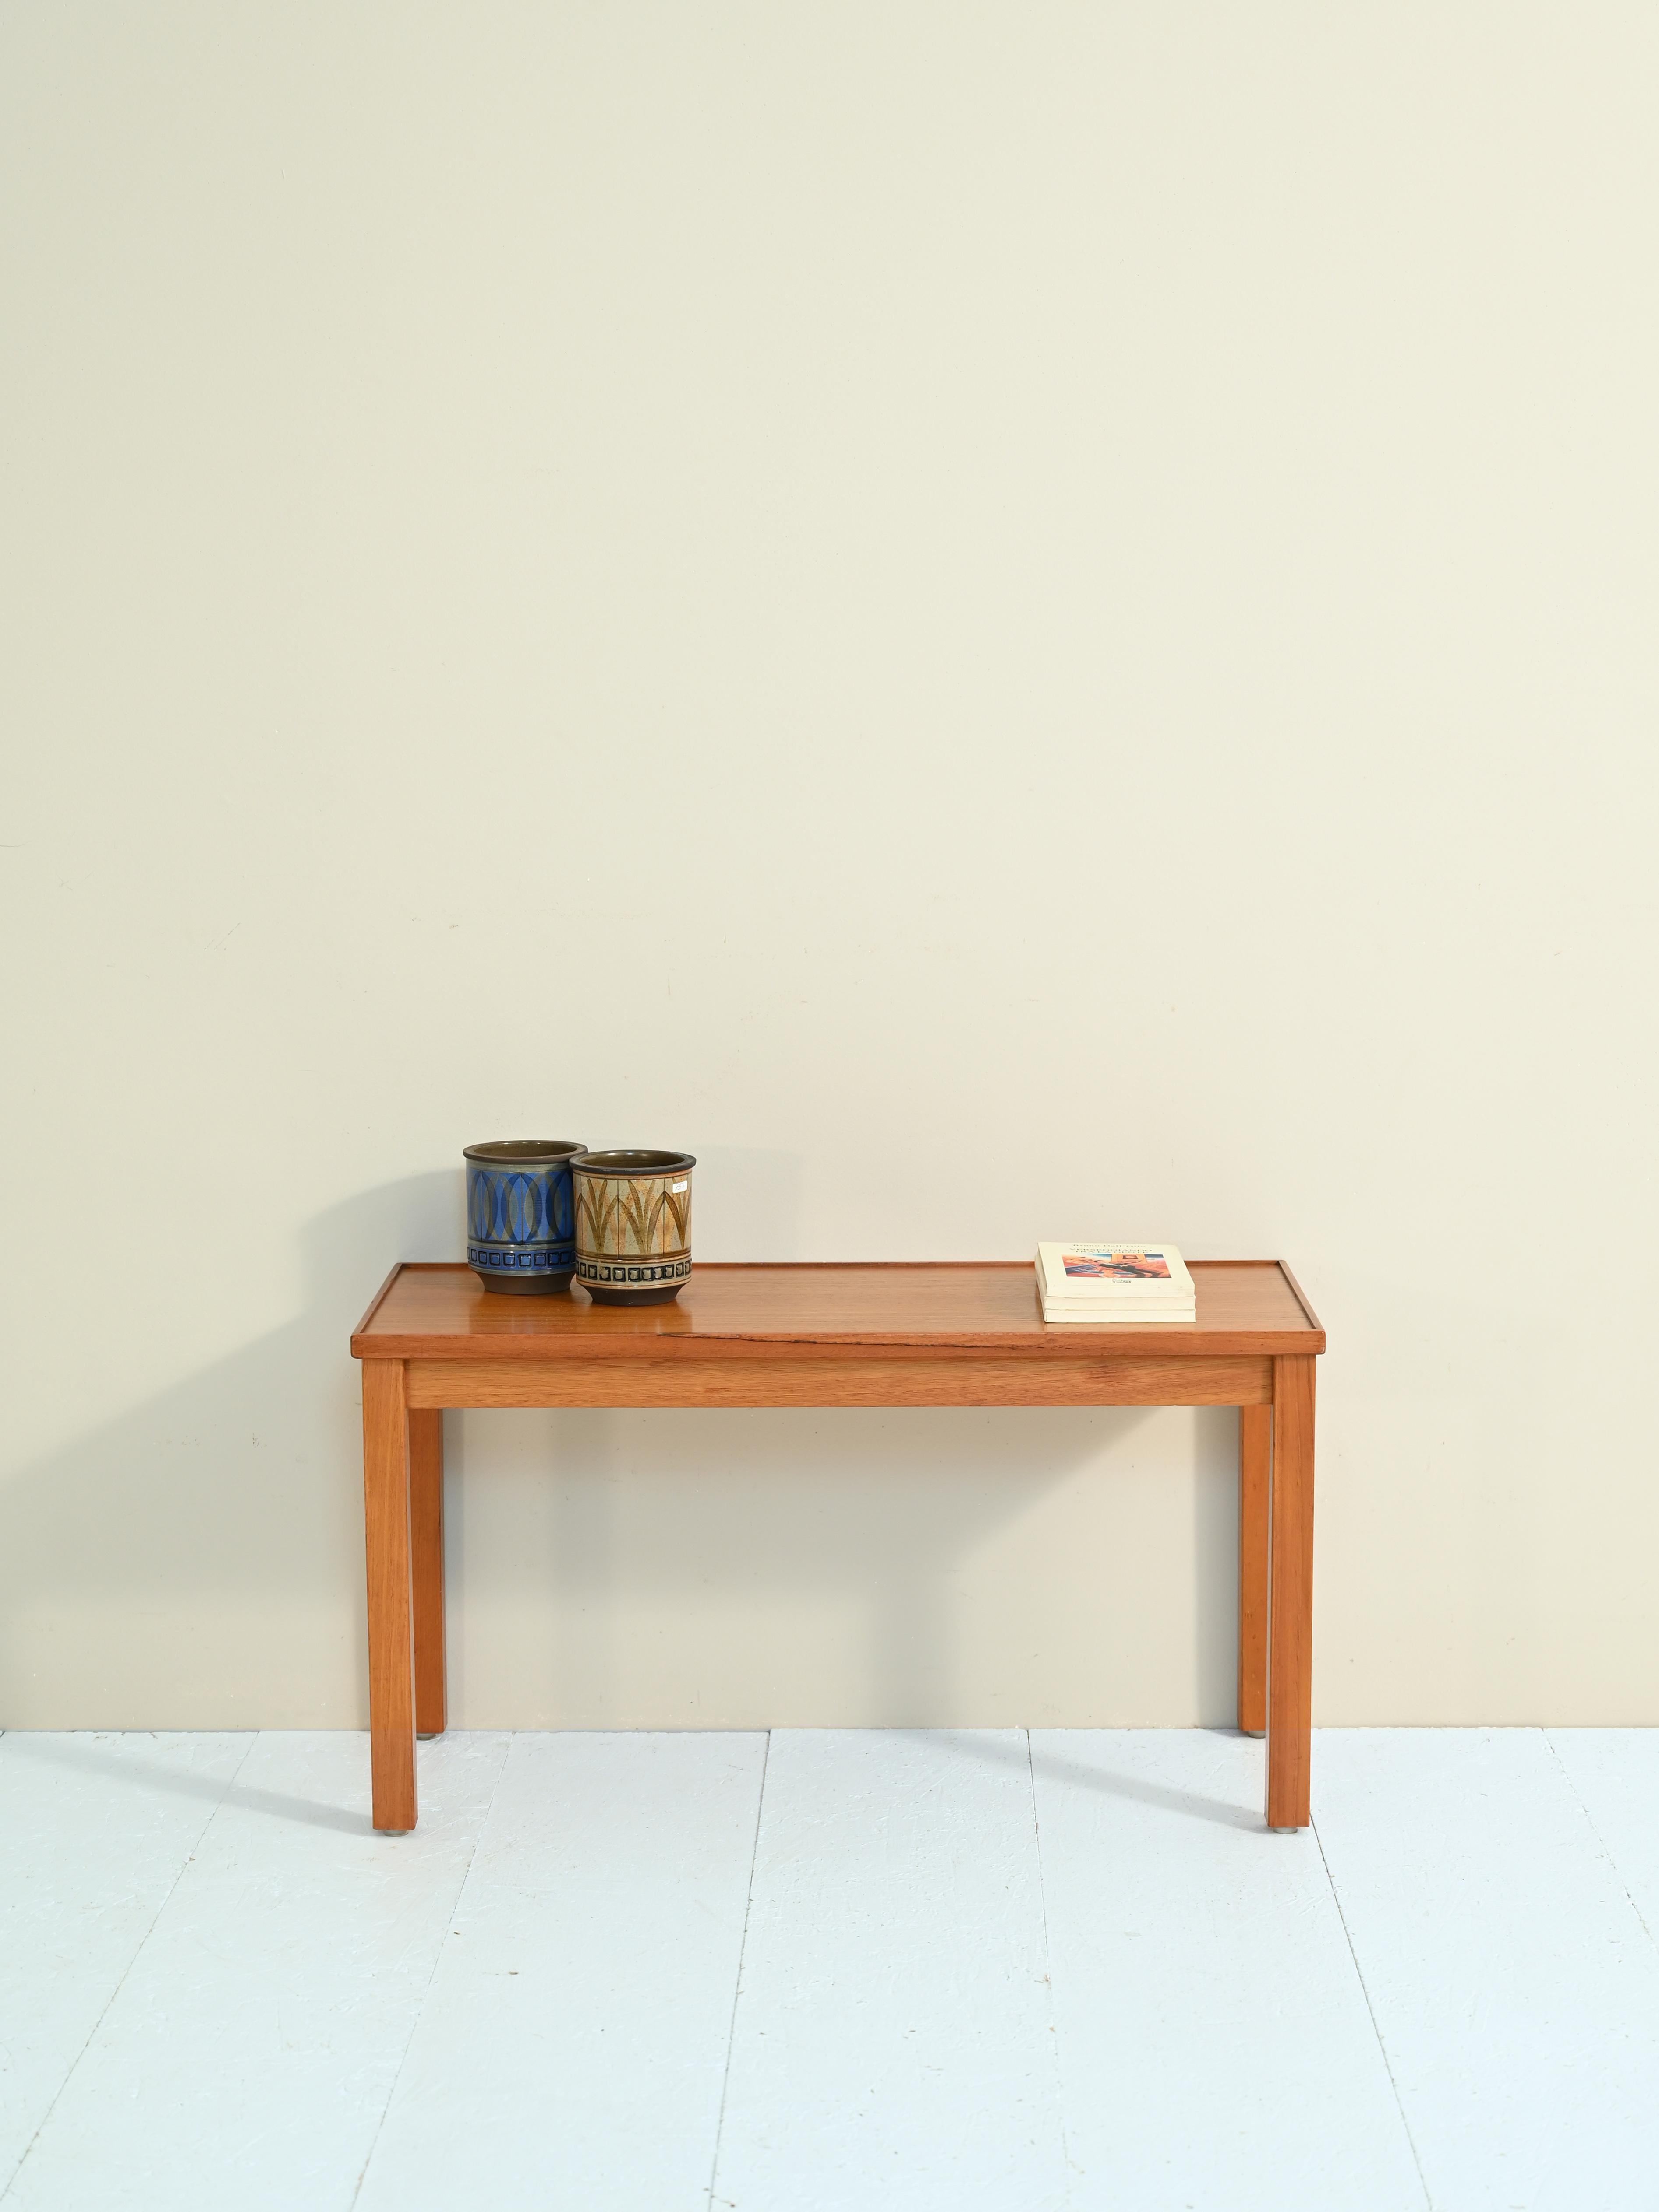 Teak wood coffee table/bench from vintage Scandinavian manufacture.

This teak wood piece of furniture stands out for both its versatility and its minimalist and
elegant, ideal for use as a sofa table or small bench.

Good condition: the piece of